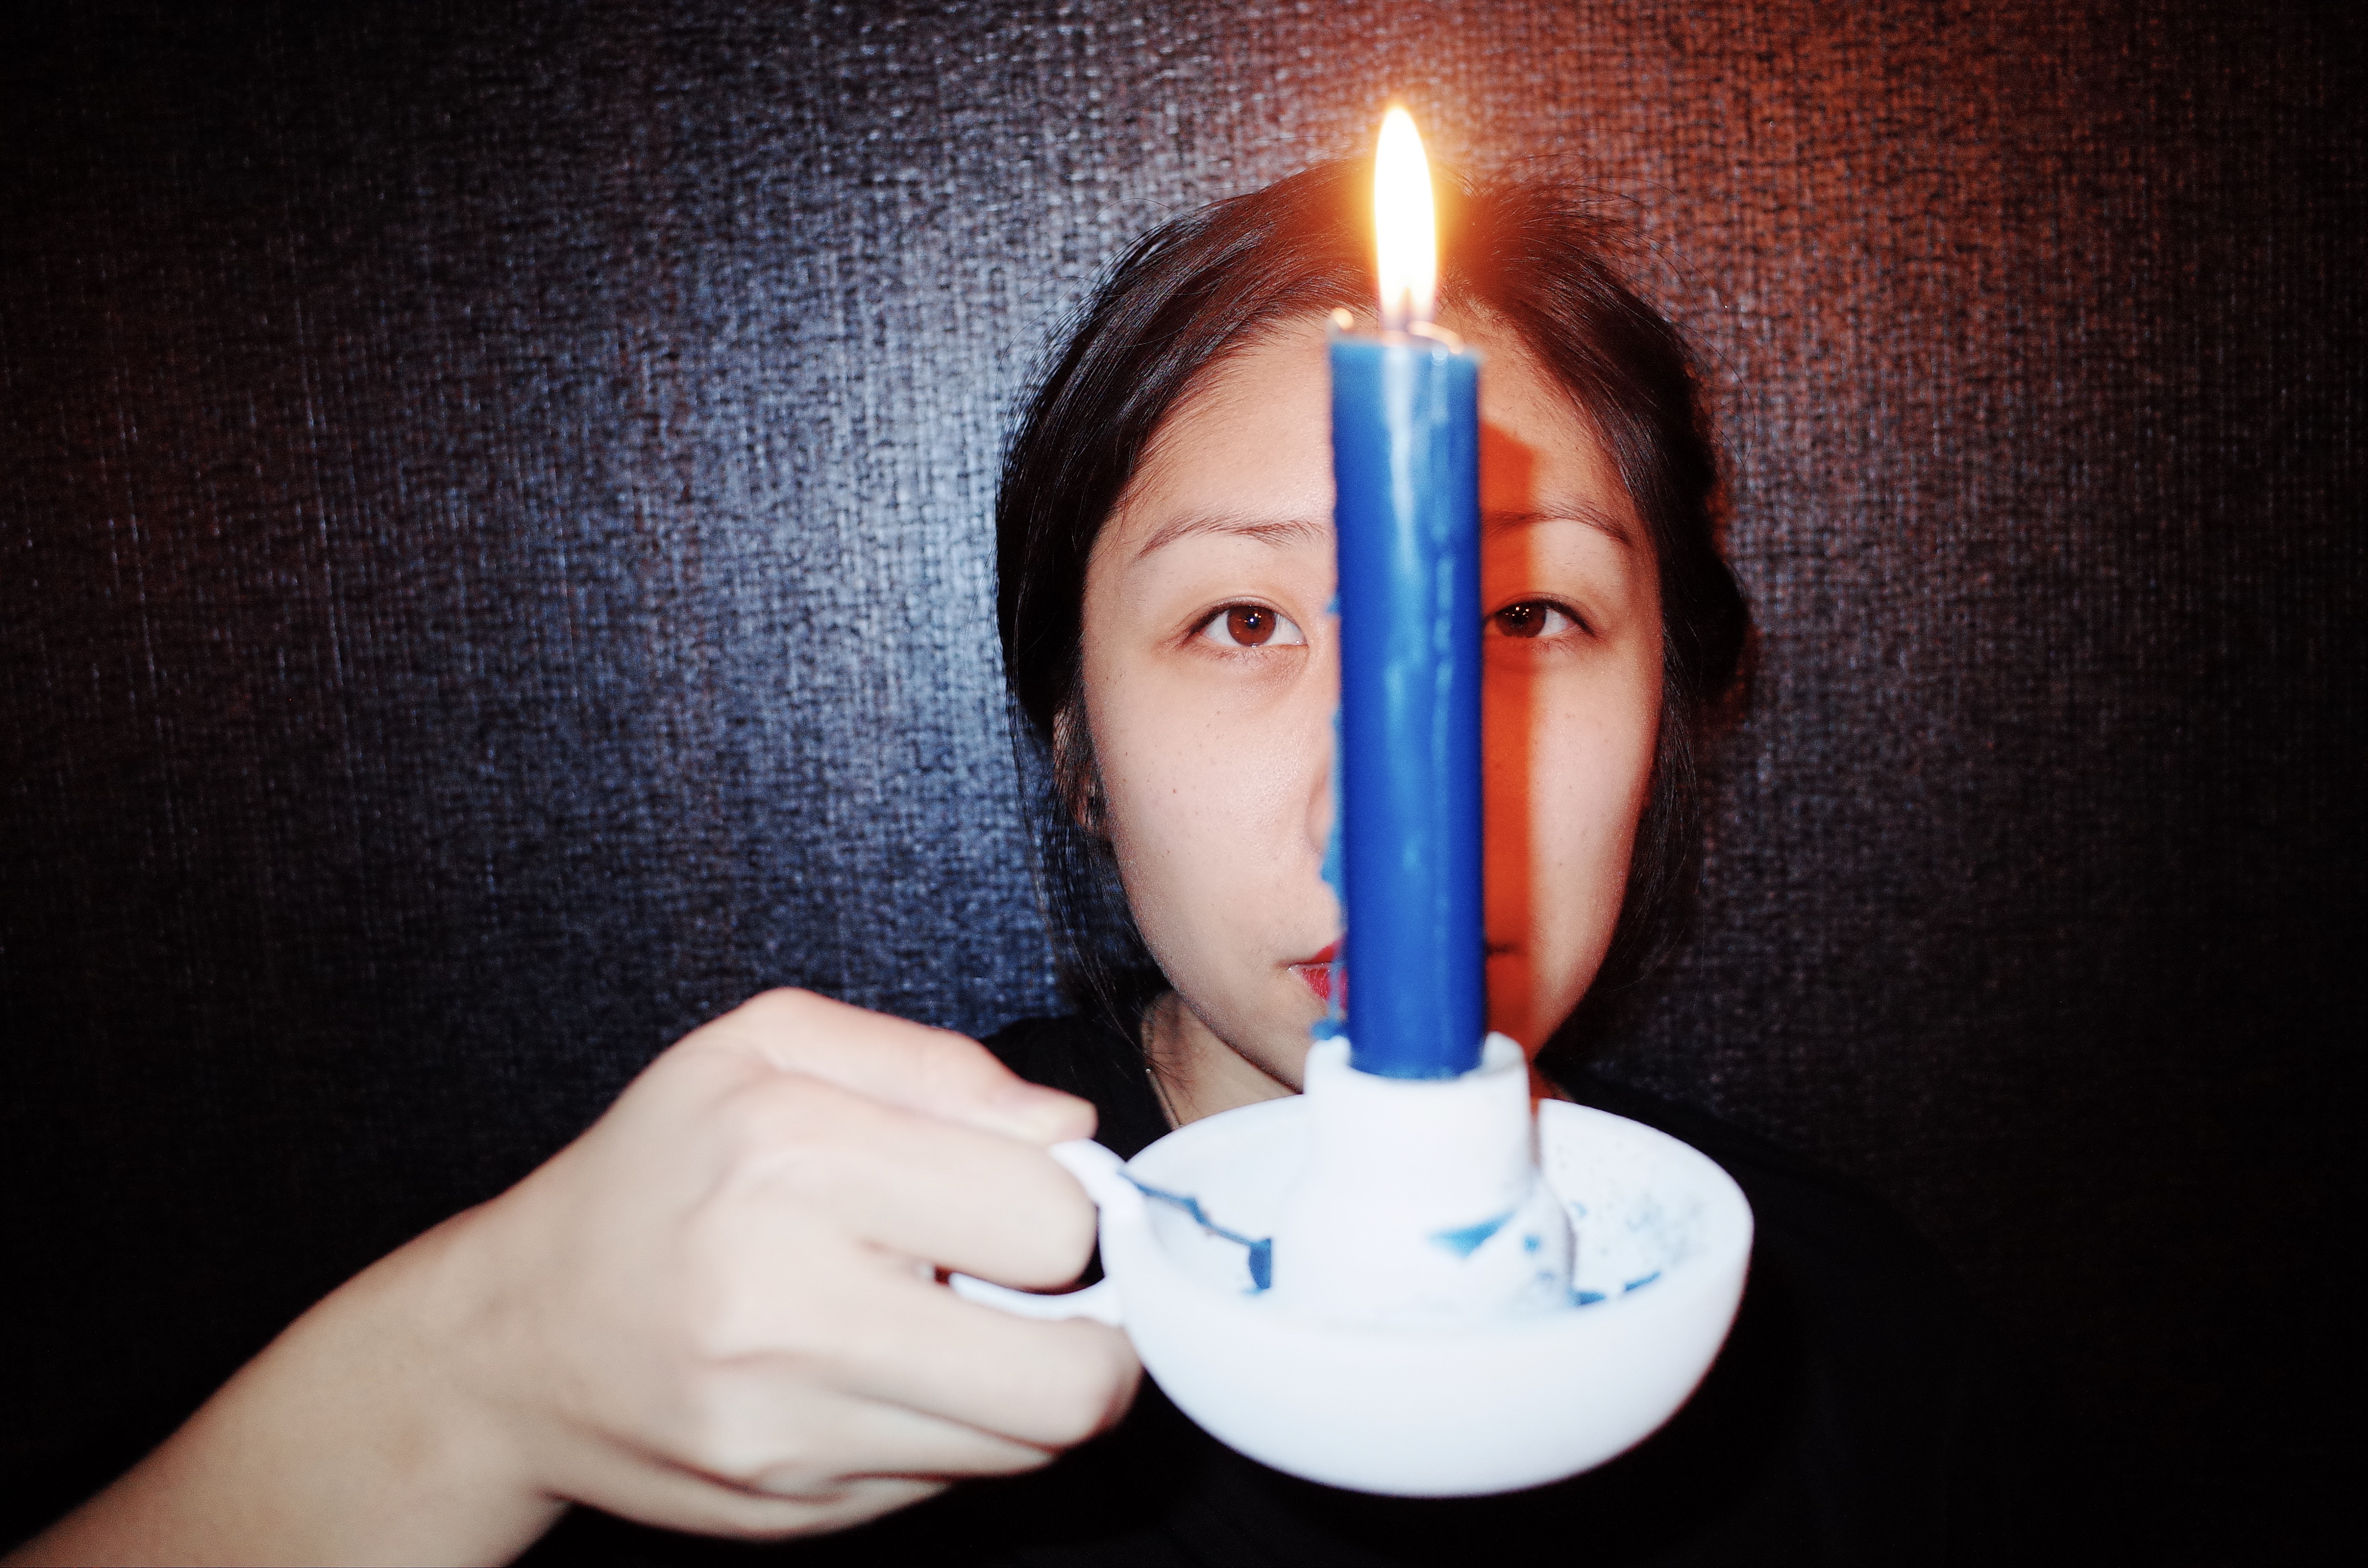 Cindy with blue candle over face. Marseille, 2017